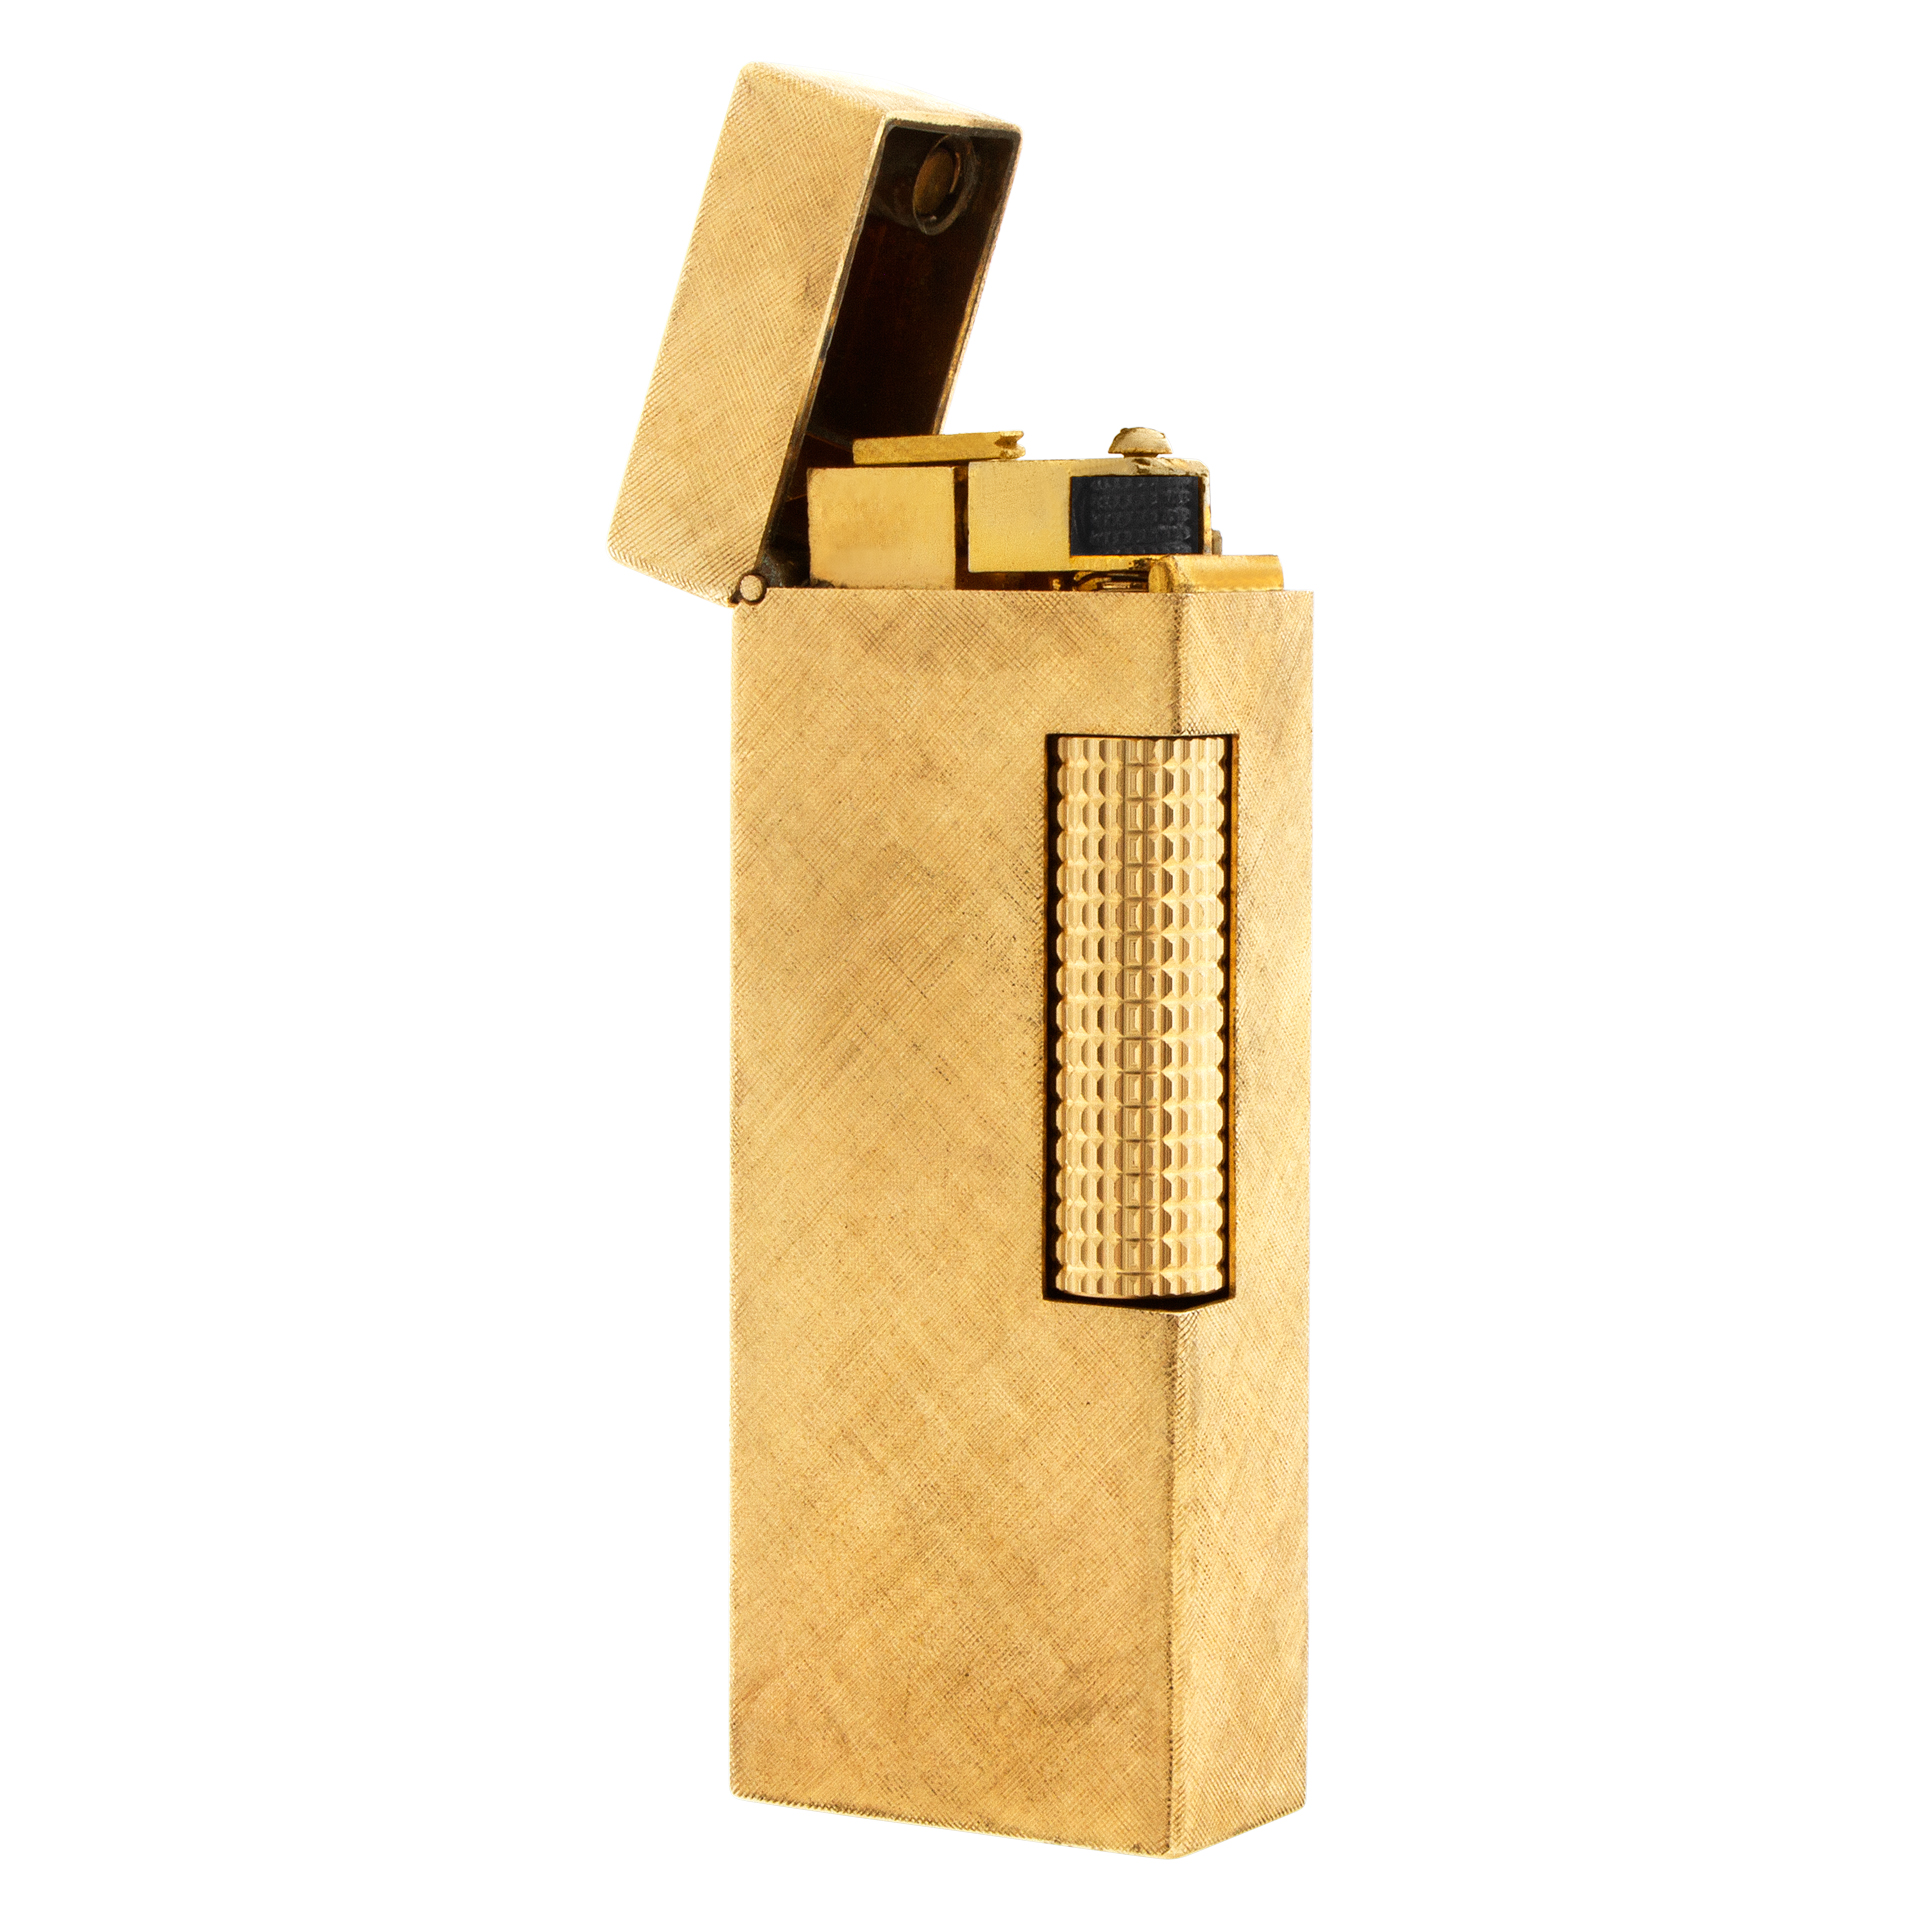 Dunhill refillable lighter in 14k yellow gold | eBay